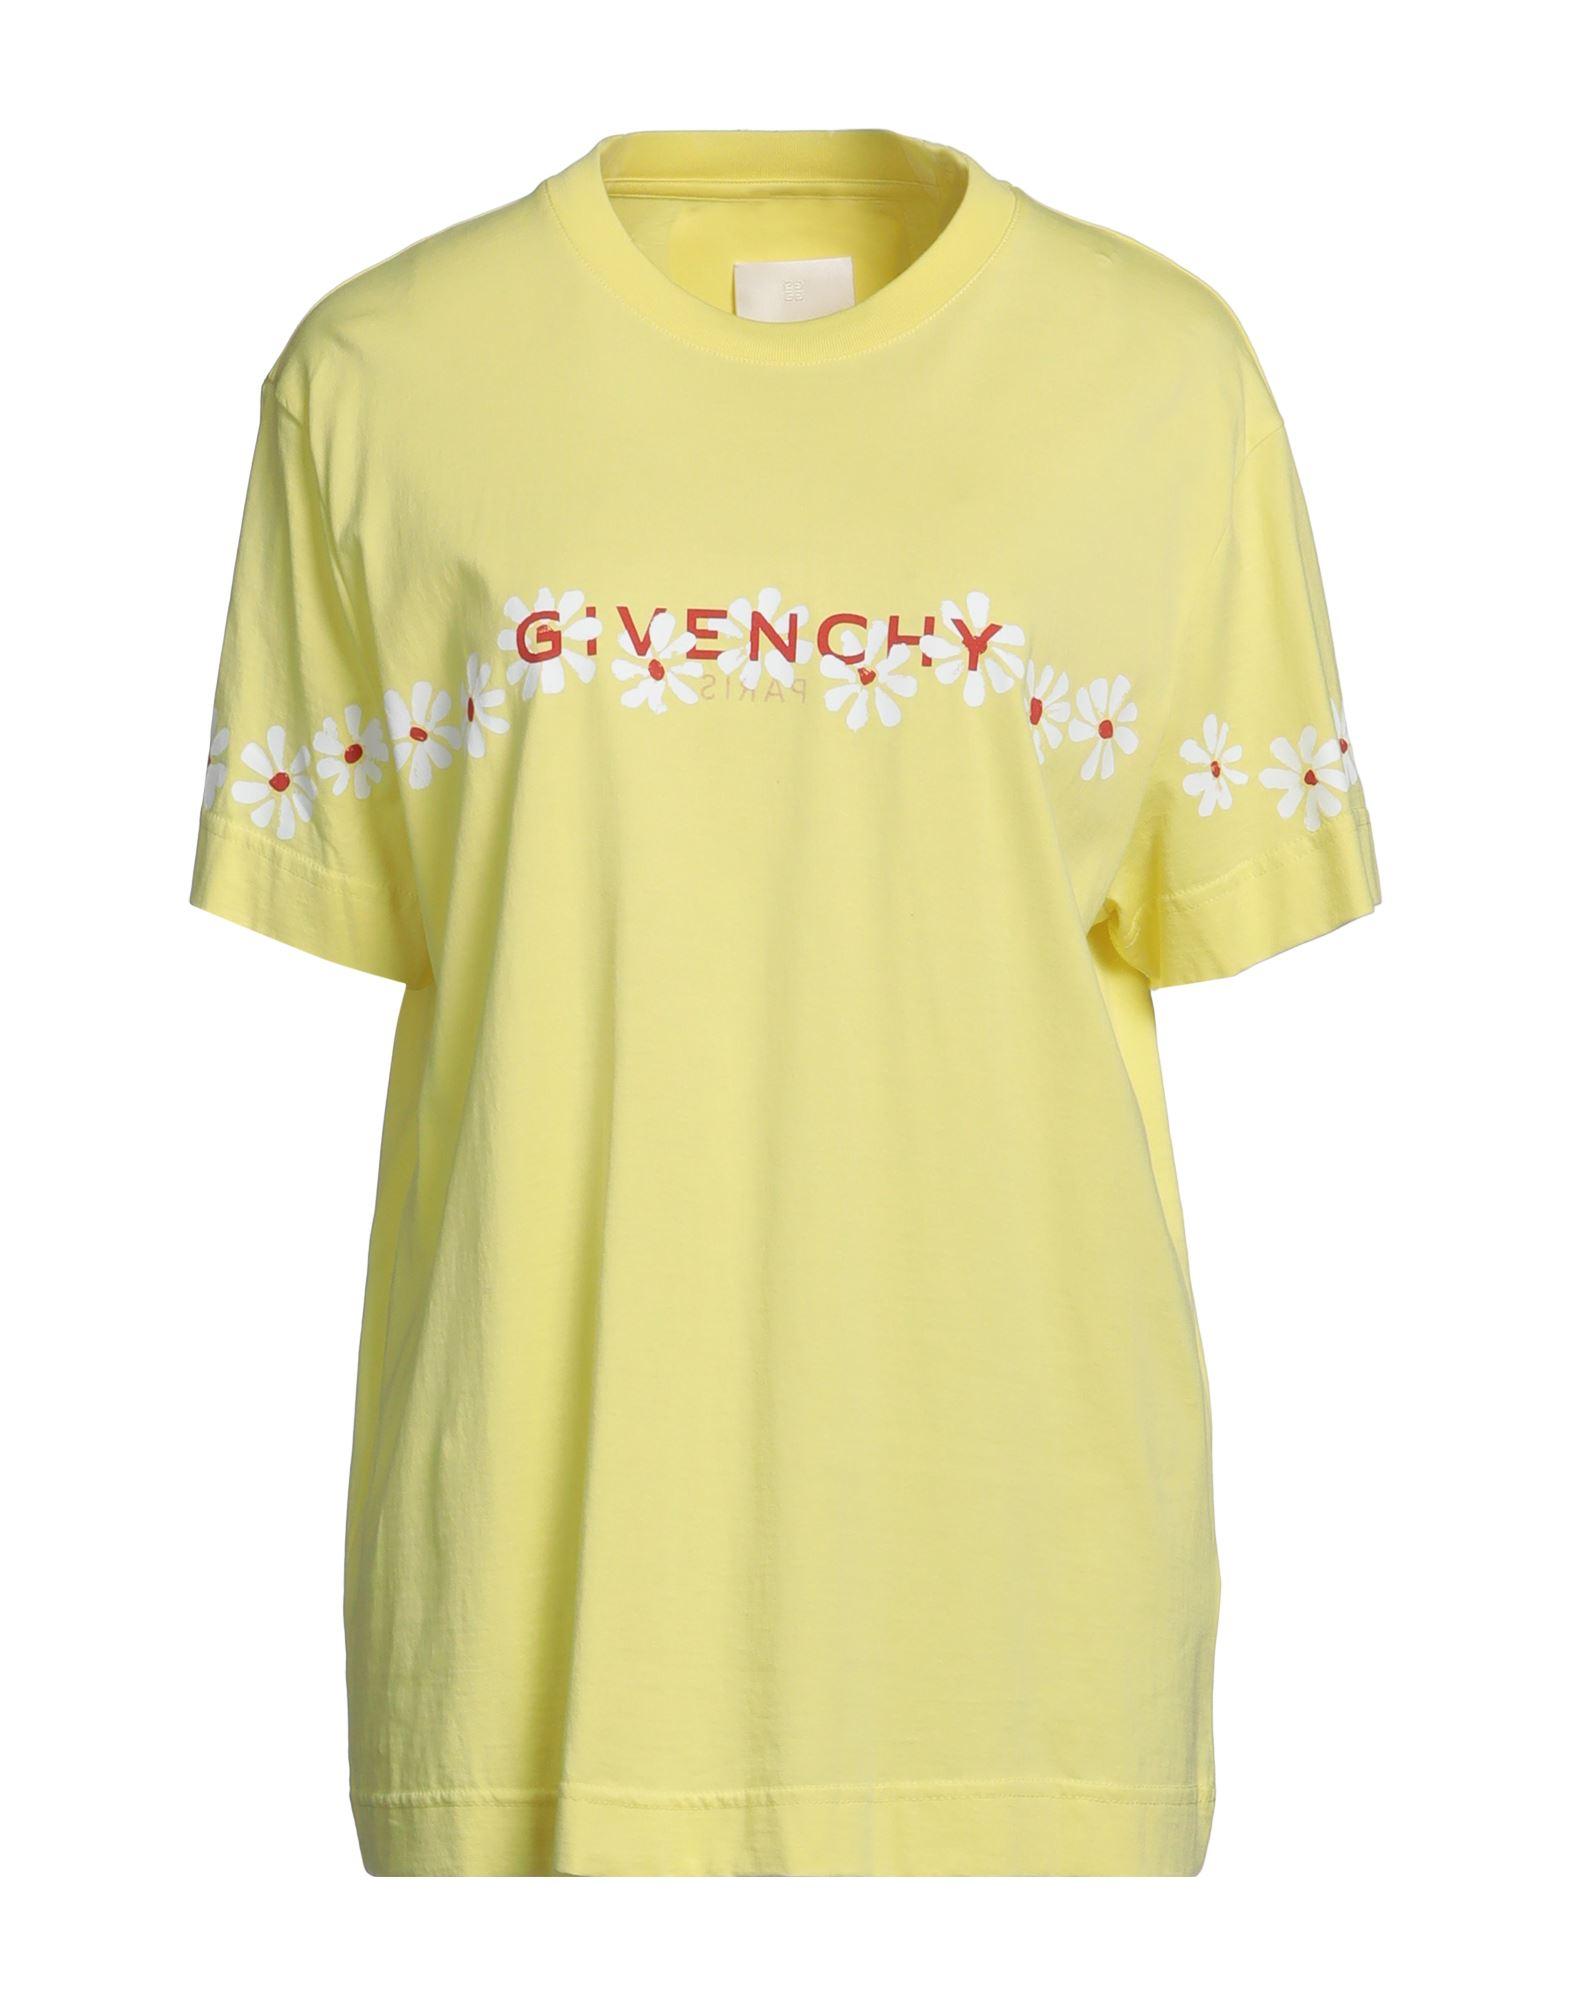 Givenchy T-shirt in Yellow | Lyst Australia